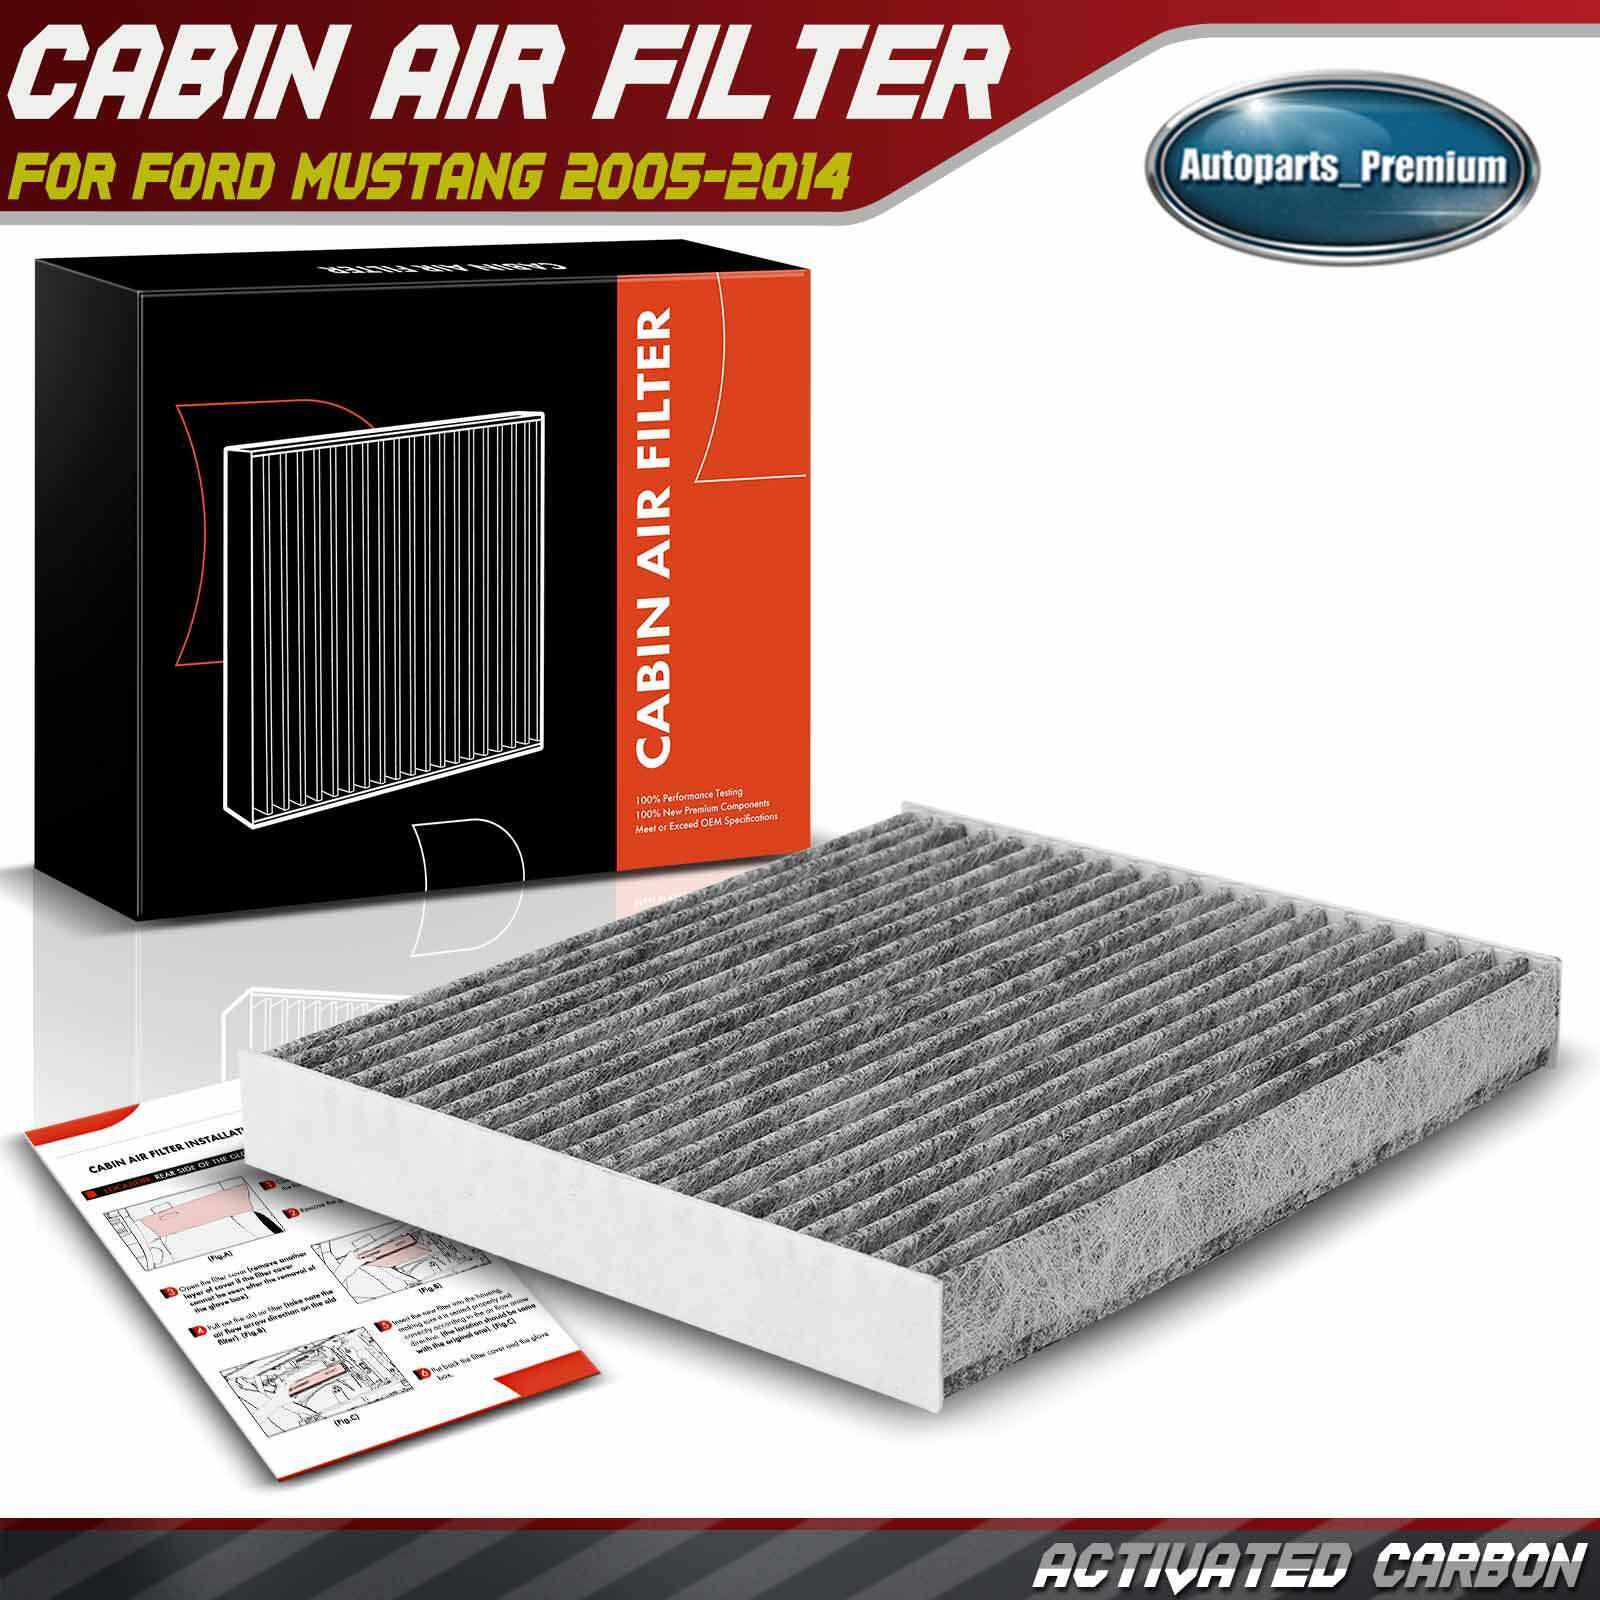 New Activated Carbon Cabin Air Filter for Ford Mustang 2005 2006 2007 2008-2014